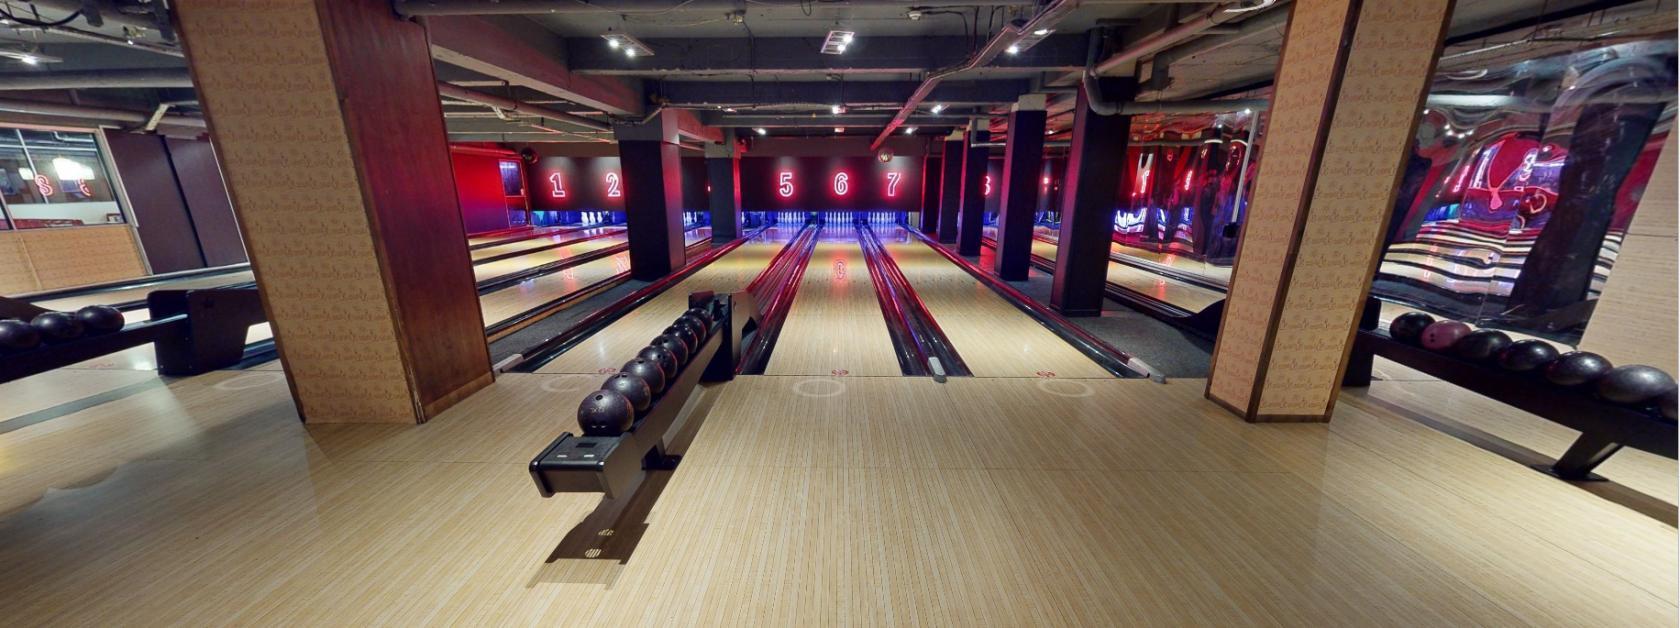 Exclusive Hire, Bloomsbury Bowling Lanes & The Kingpin Suite photo #1